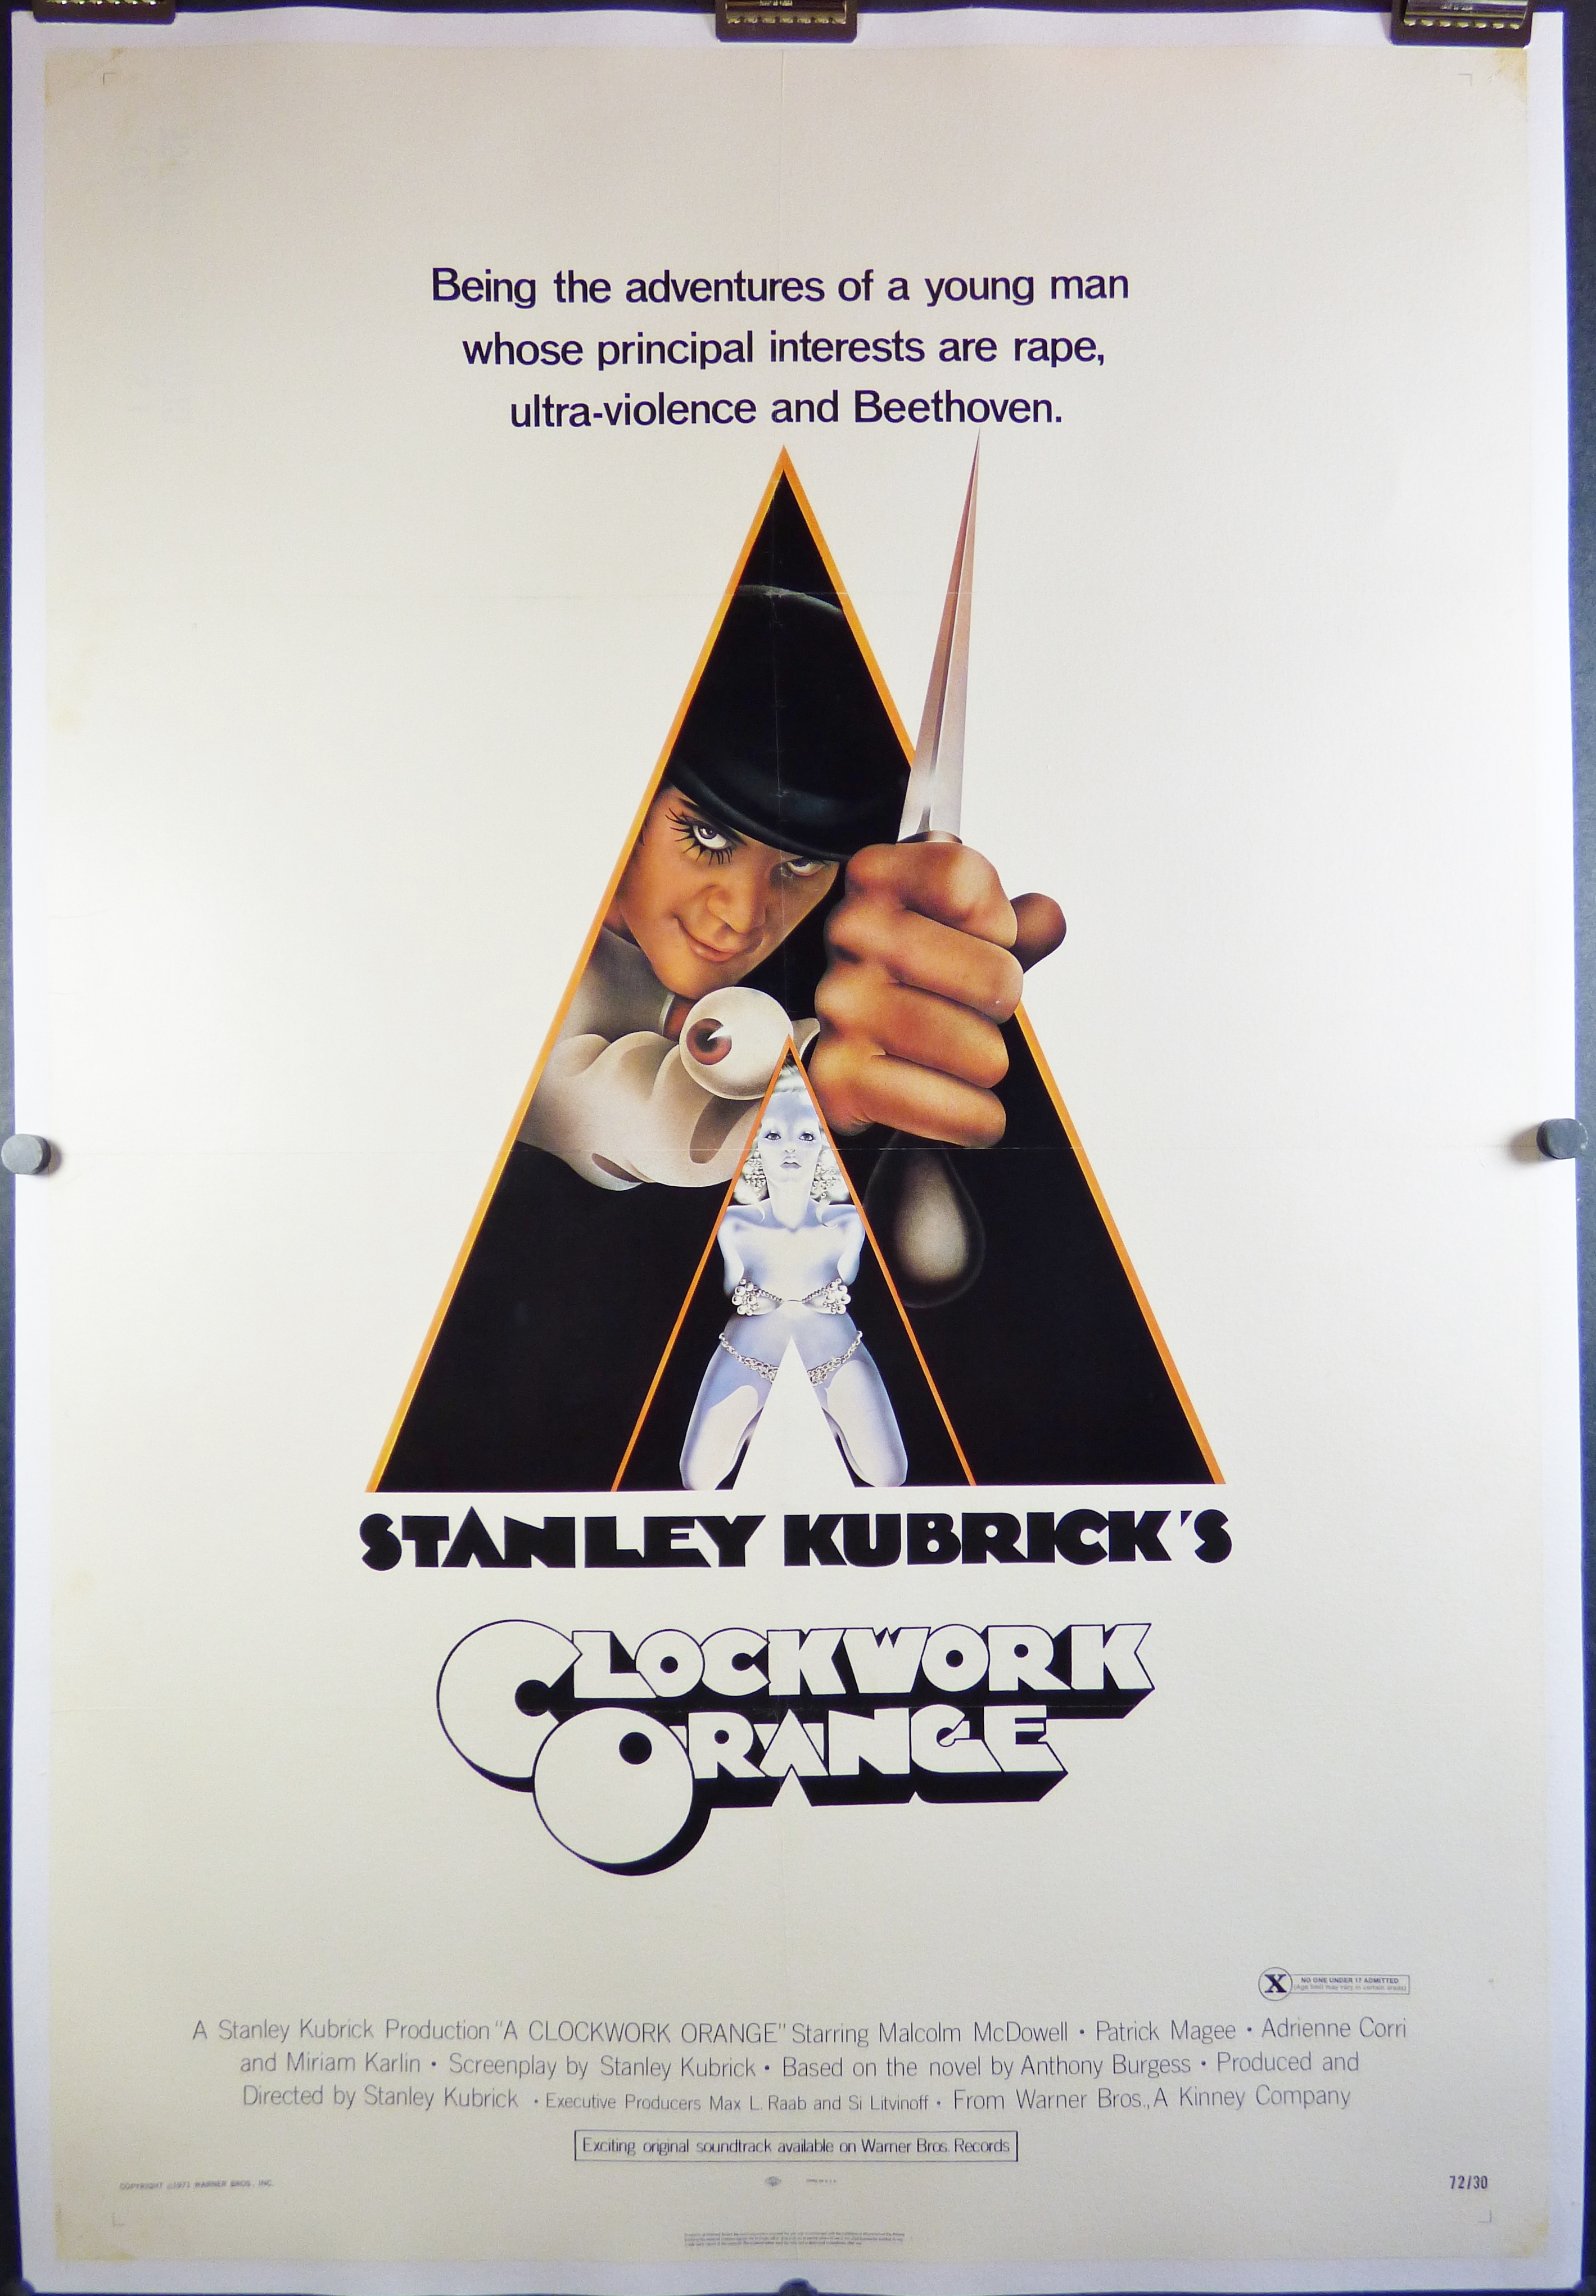 original version of the movie ratings poster before the X rating